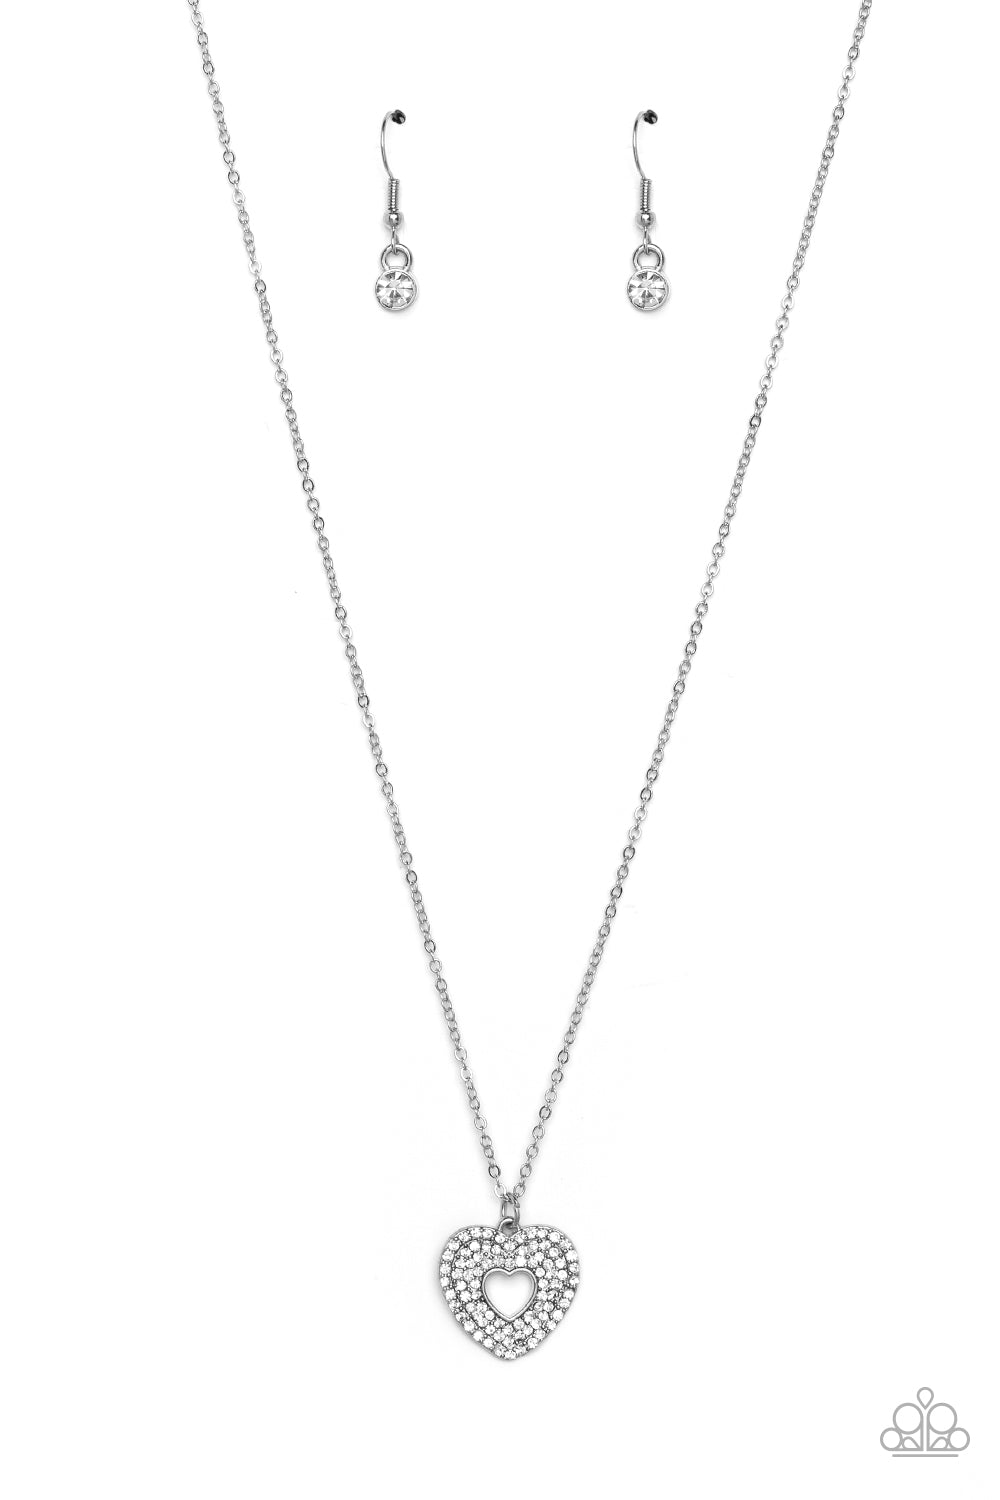 Romantic Retreat Paparazzi Accessories Necklace with Earrings - White